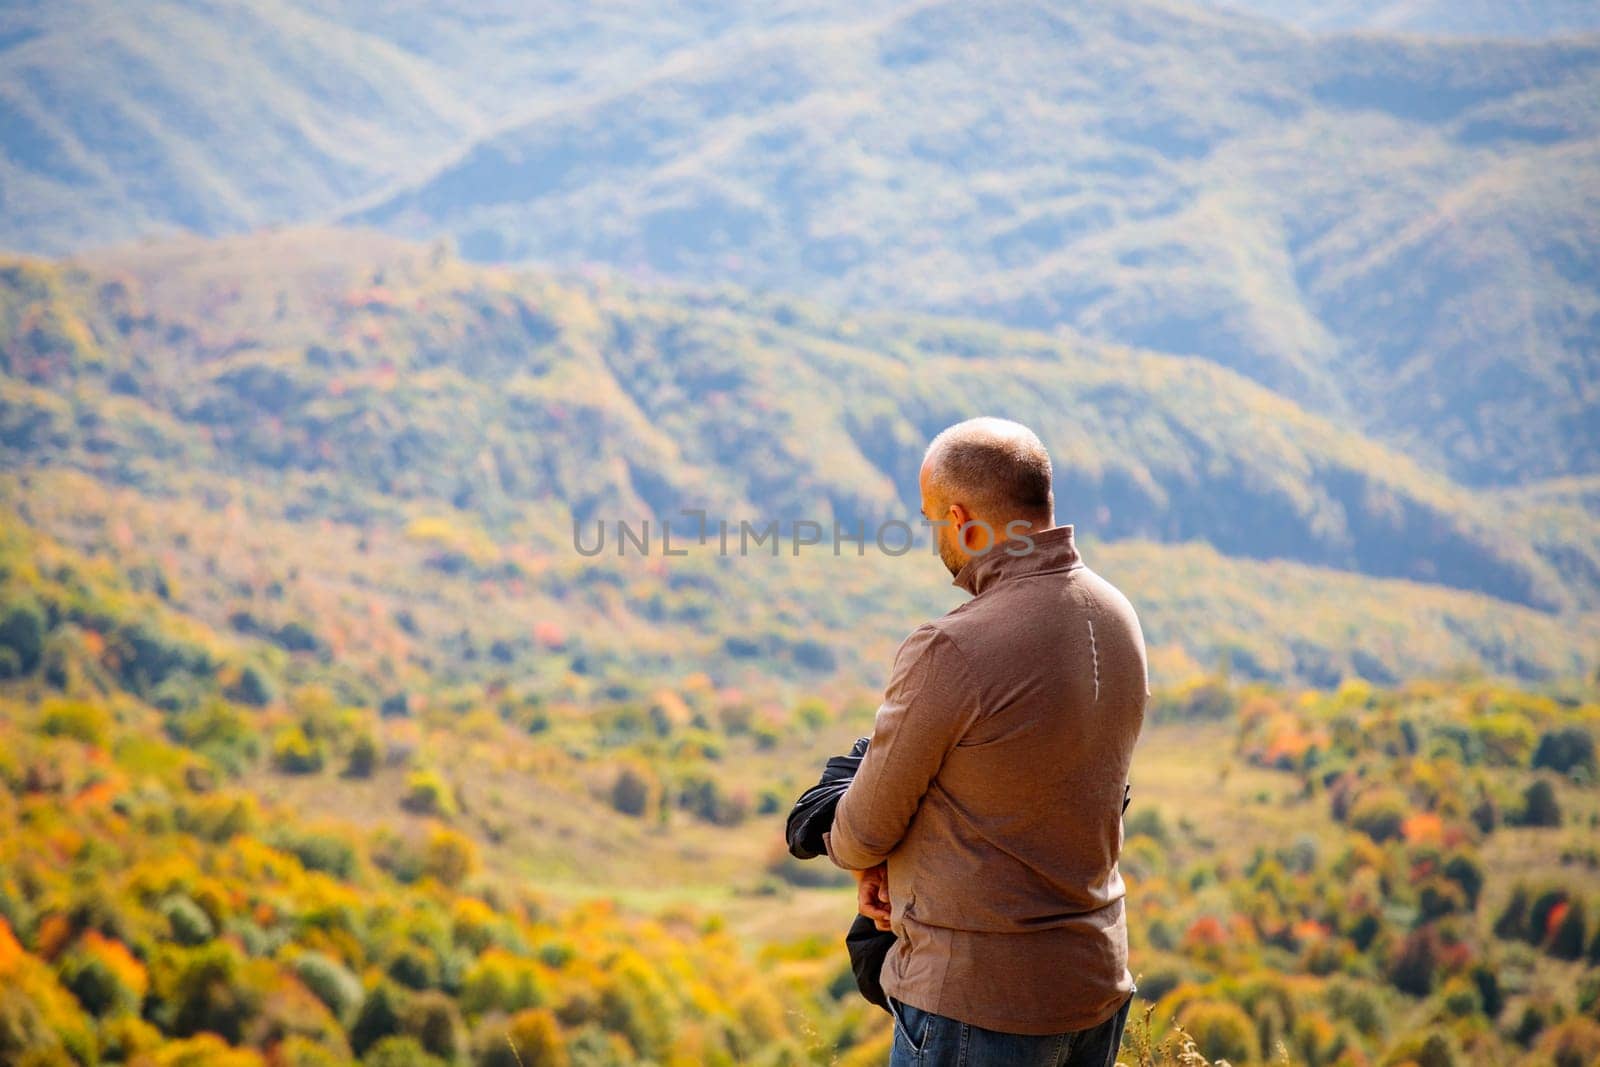 Breathtaking Mountain View: Man Enjoying Serene Landscape from Sacred Vantage Point by Yurich32